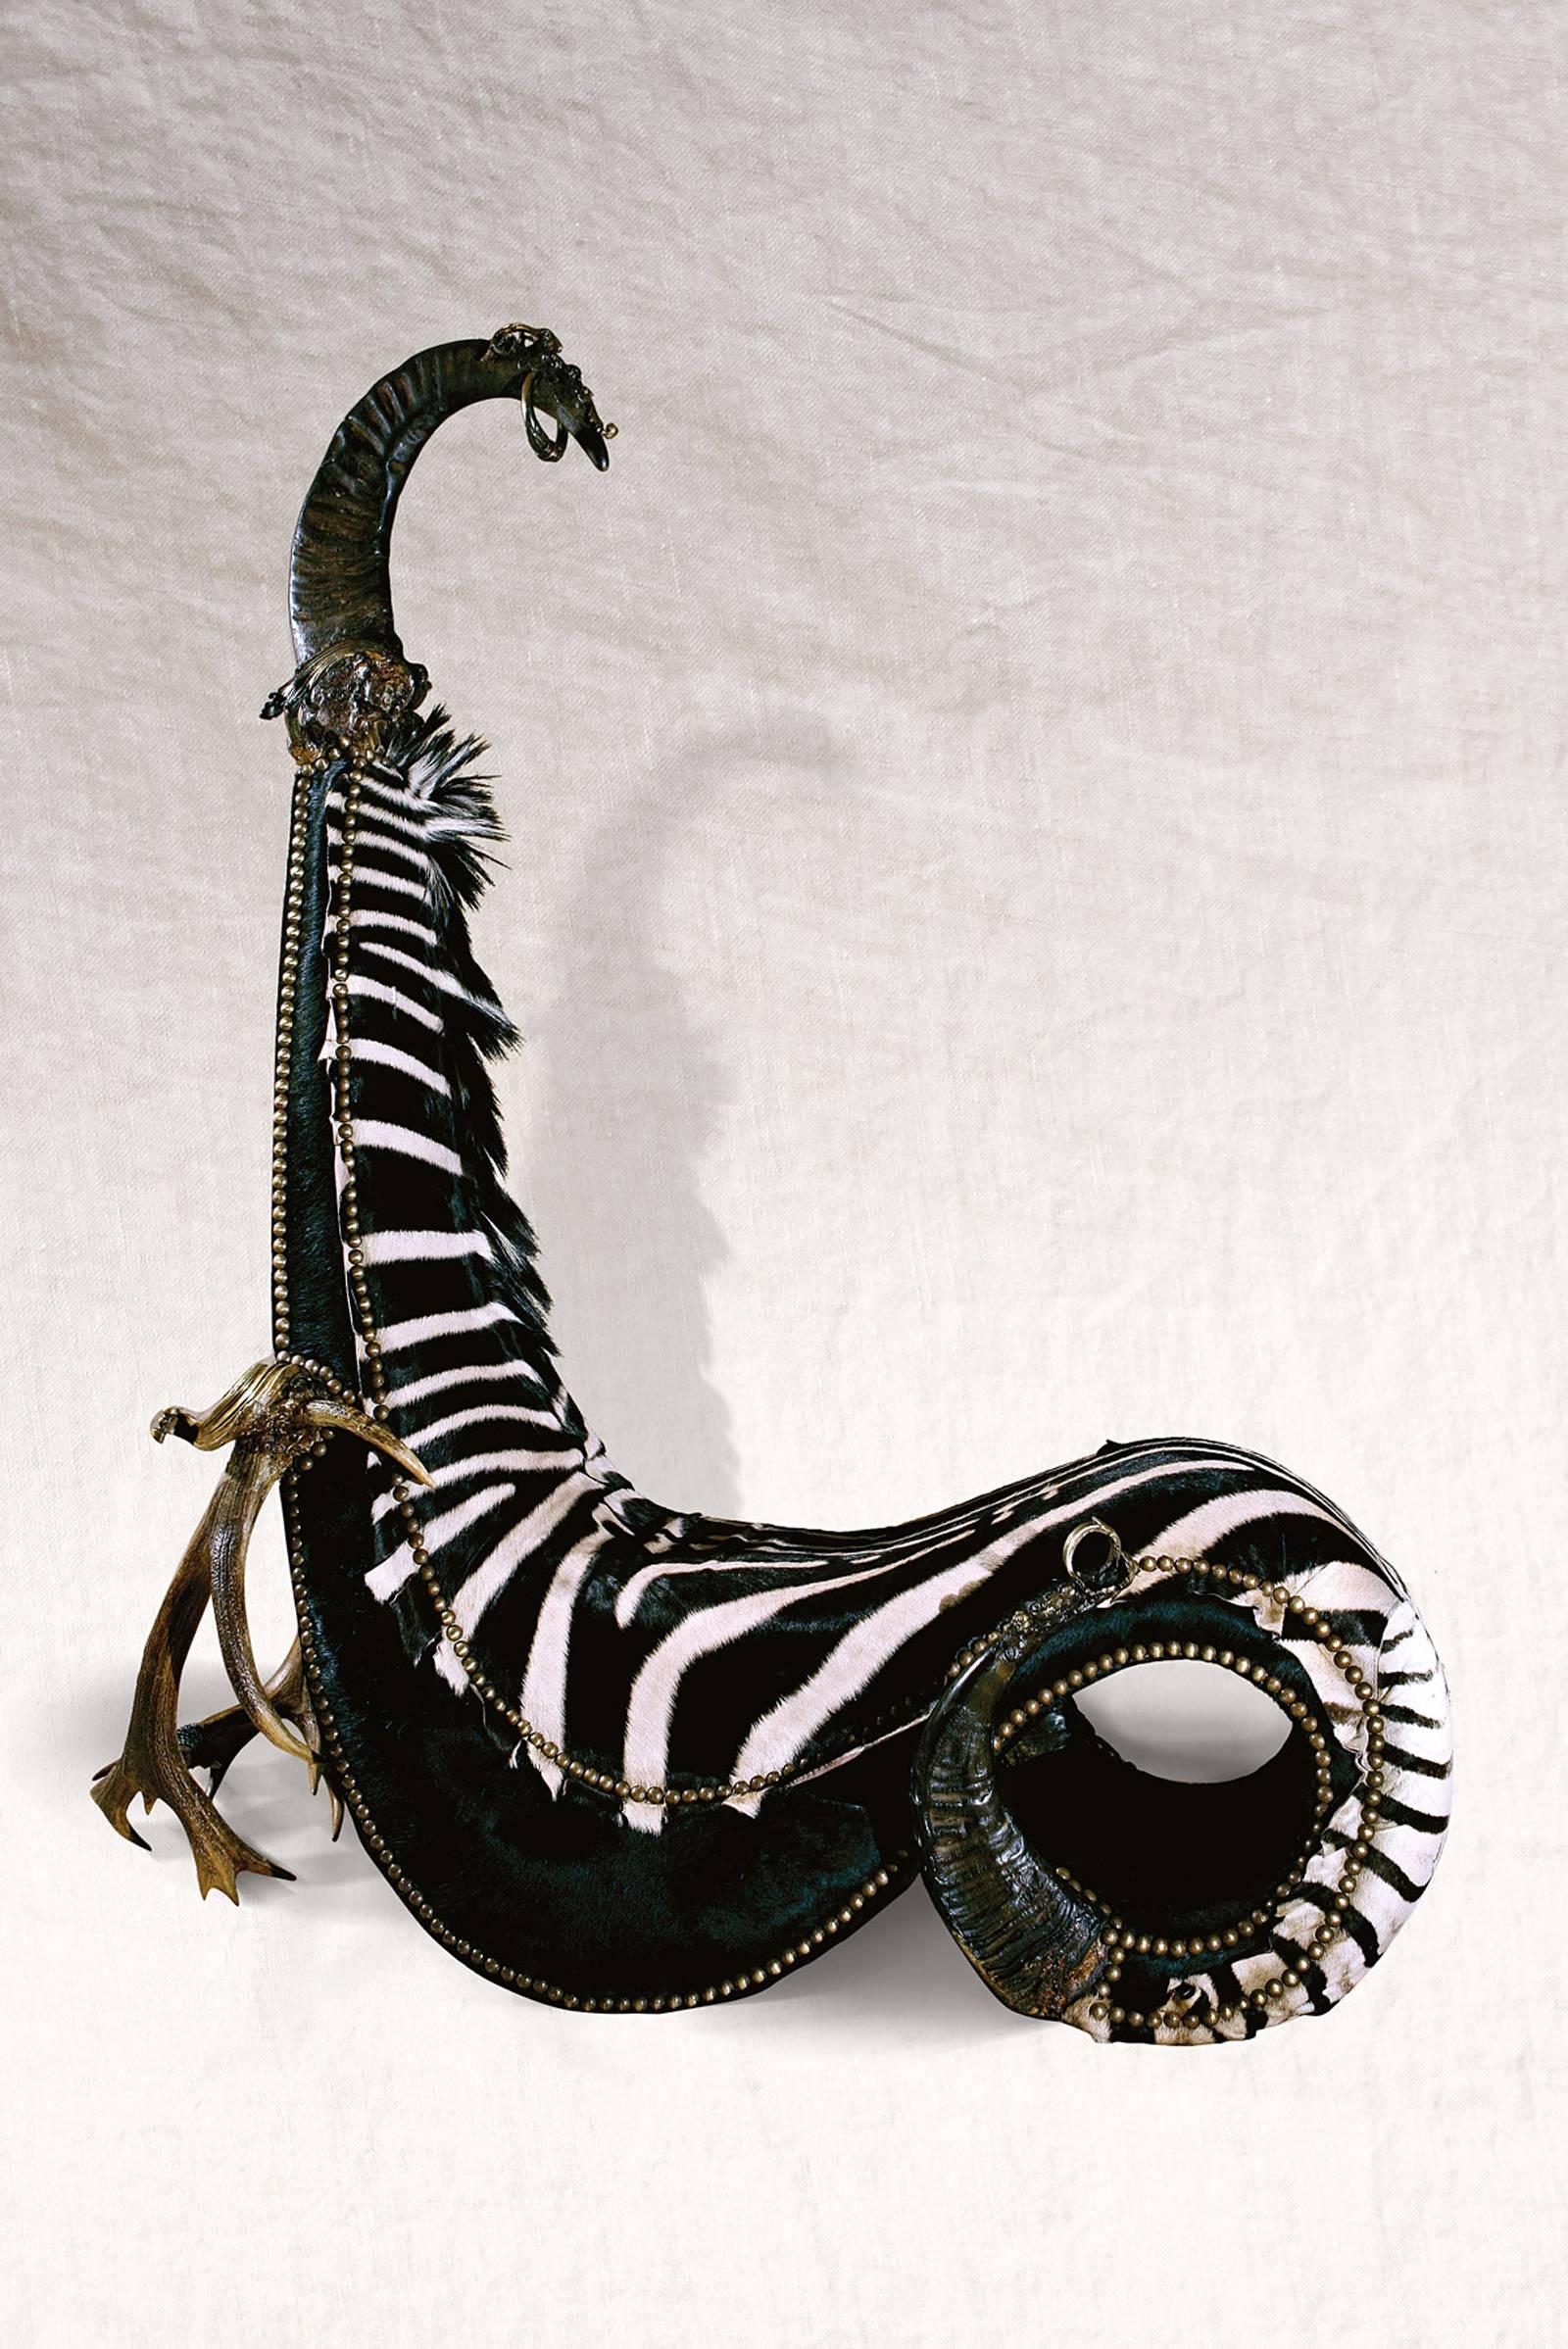 Chair zebra king with zebra skin, armrest with
deer antlers and details and nails in solid bronze. 
